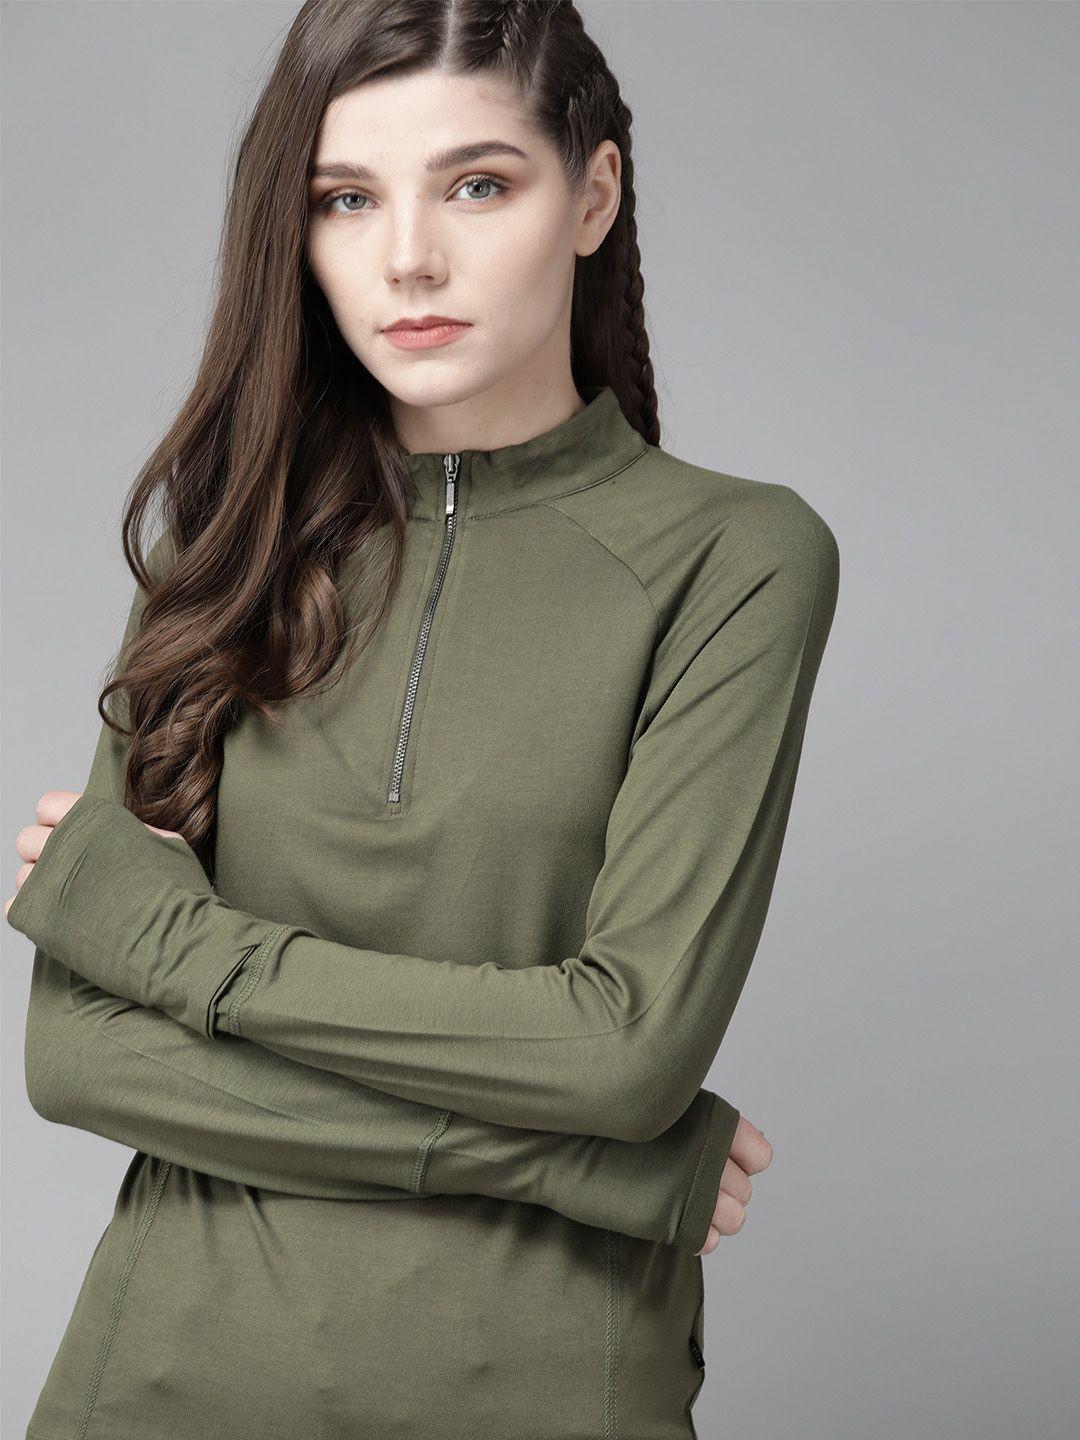 the-roadster-lifestyle-co-women-olive-green-solid-anti-bacterial-mock-neck-t-shirt